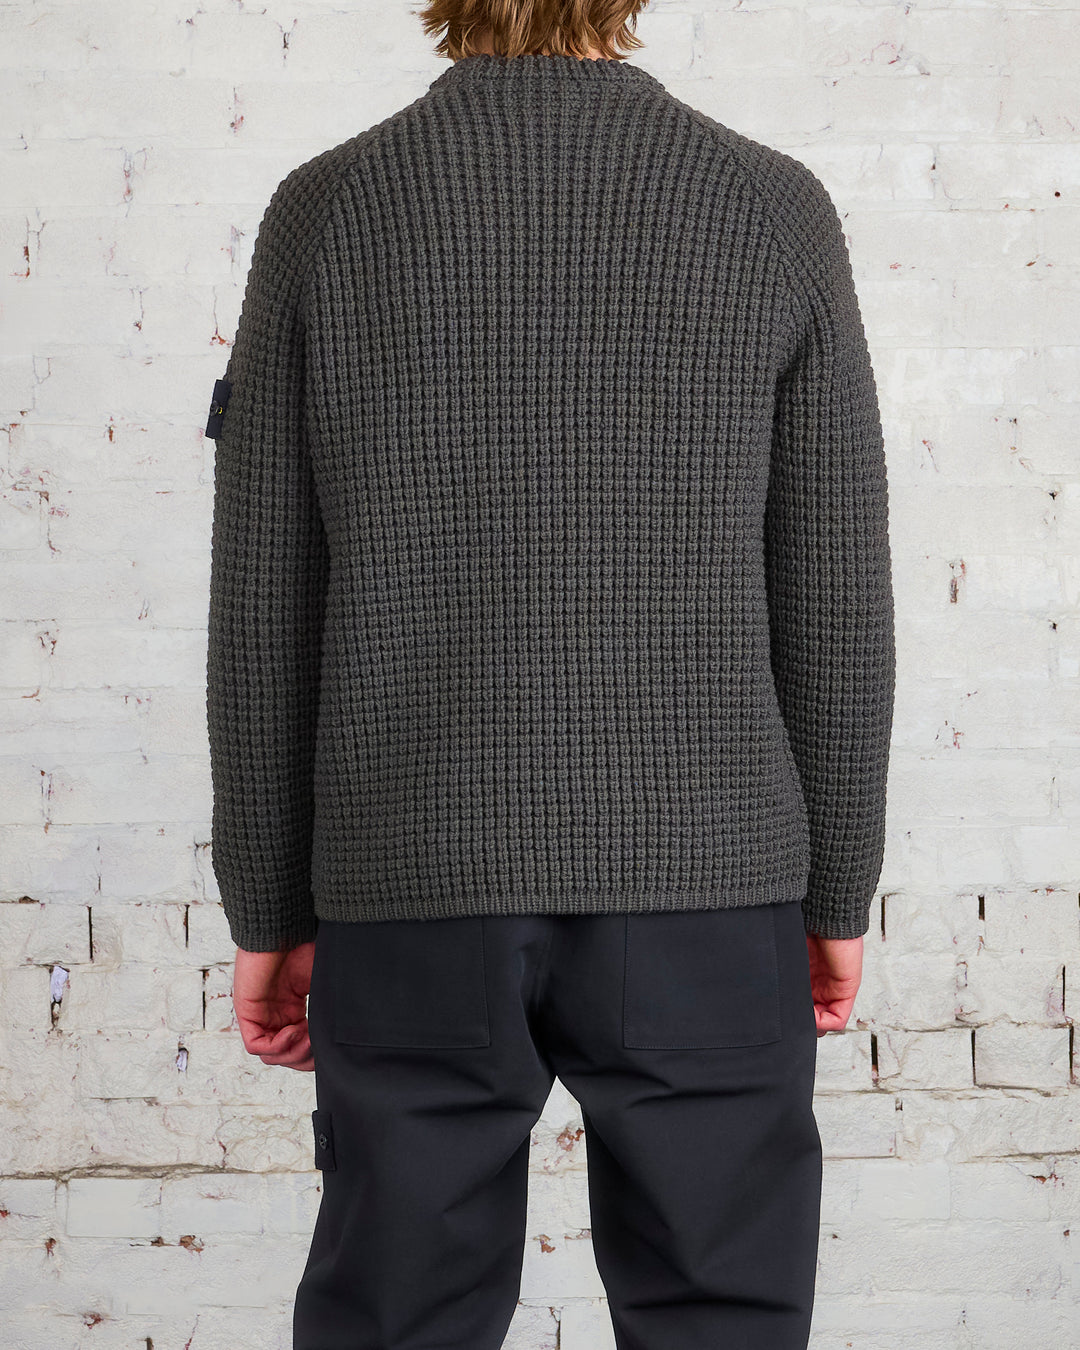 Stone Island Geelong Wool Textured Sweater Olive